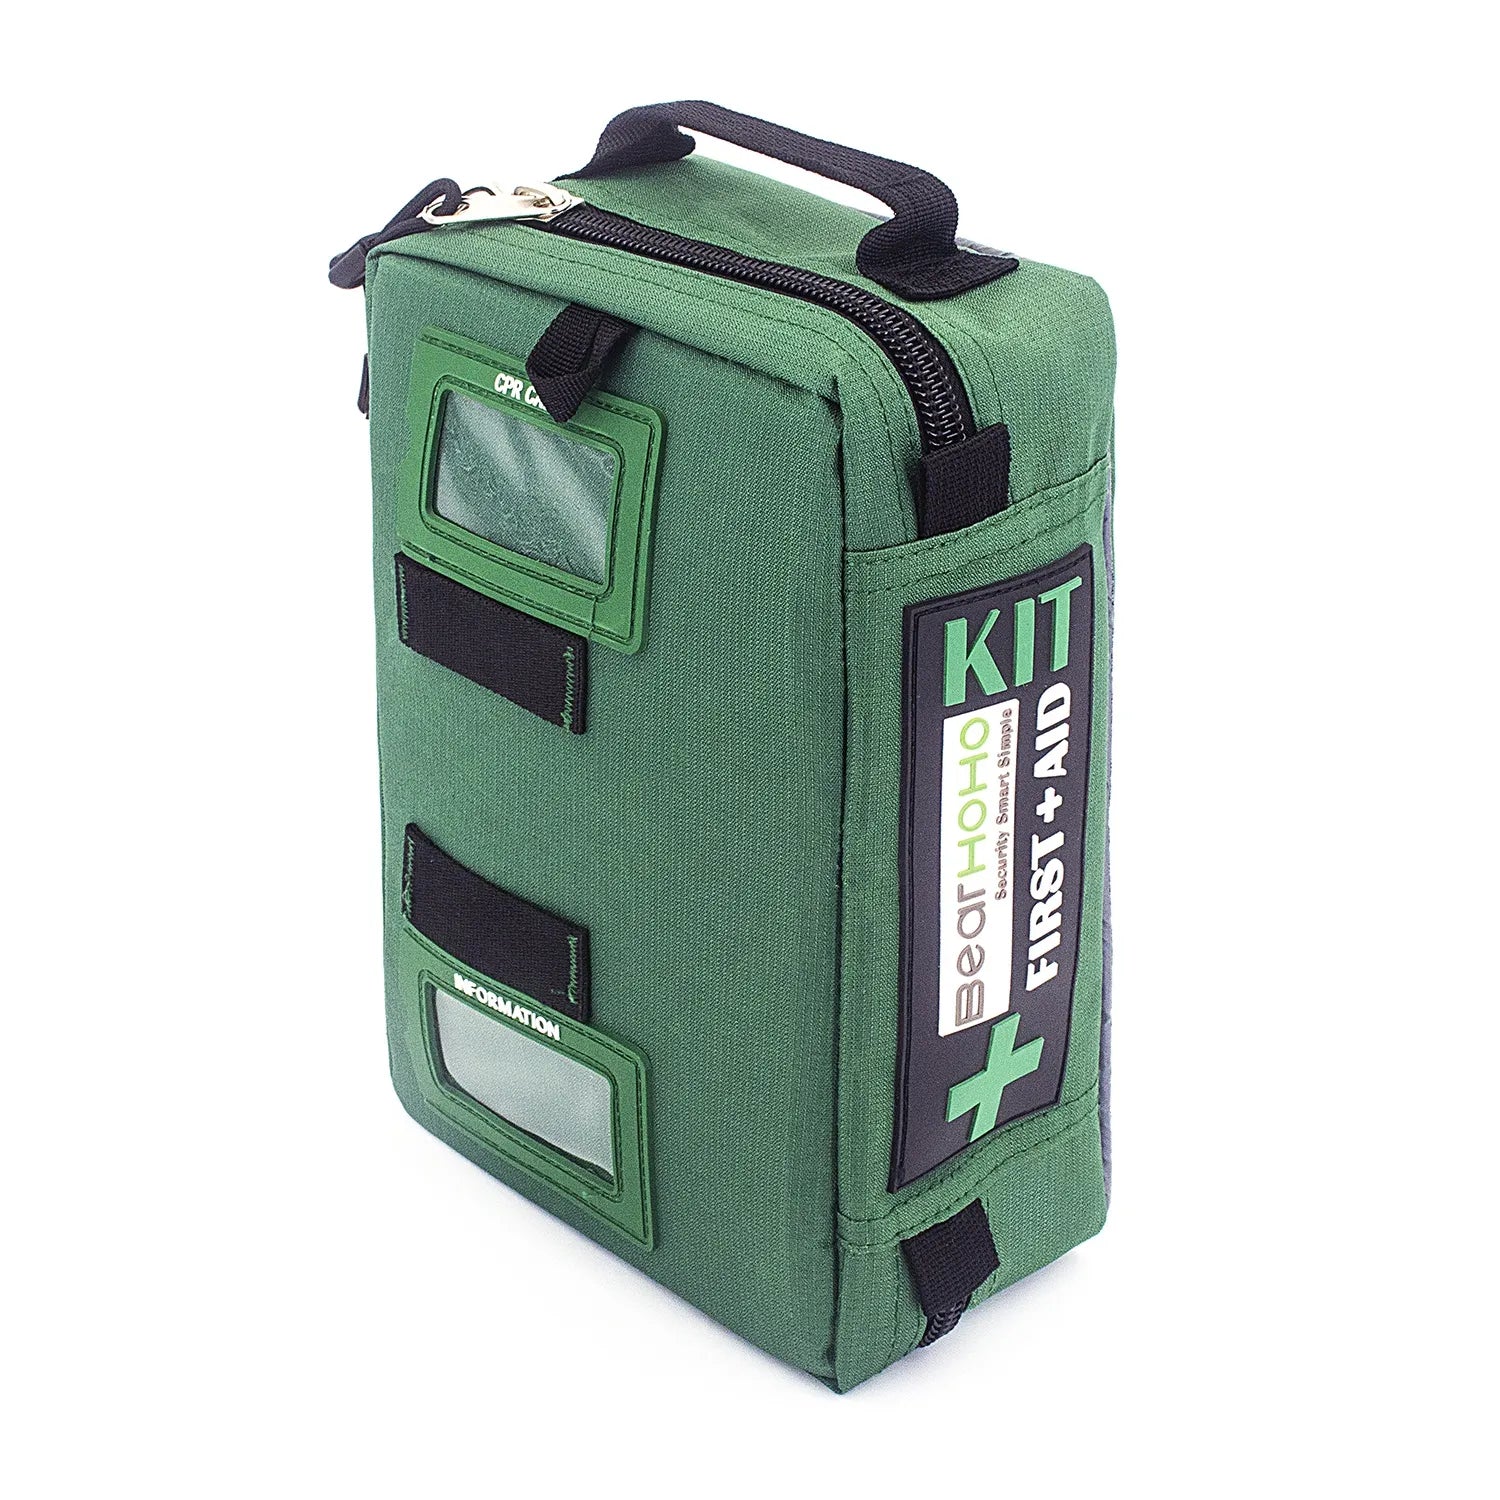 Emergency Medical Rescue Bag EMS First Responder on Call Highland Trauma Bag W/Reflectors - Highly visible forest green color 165 pieces